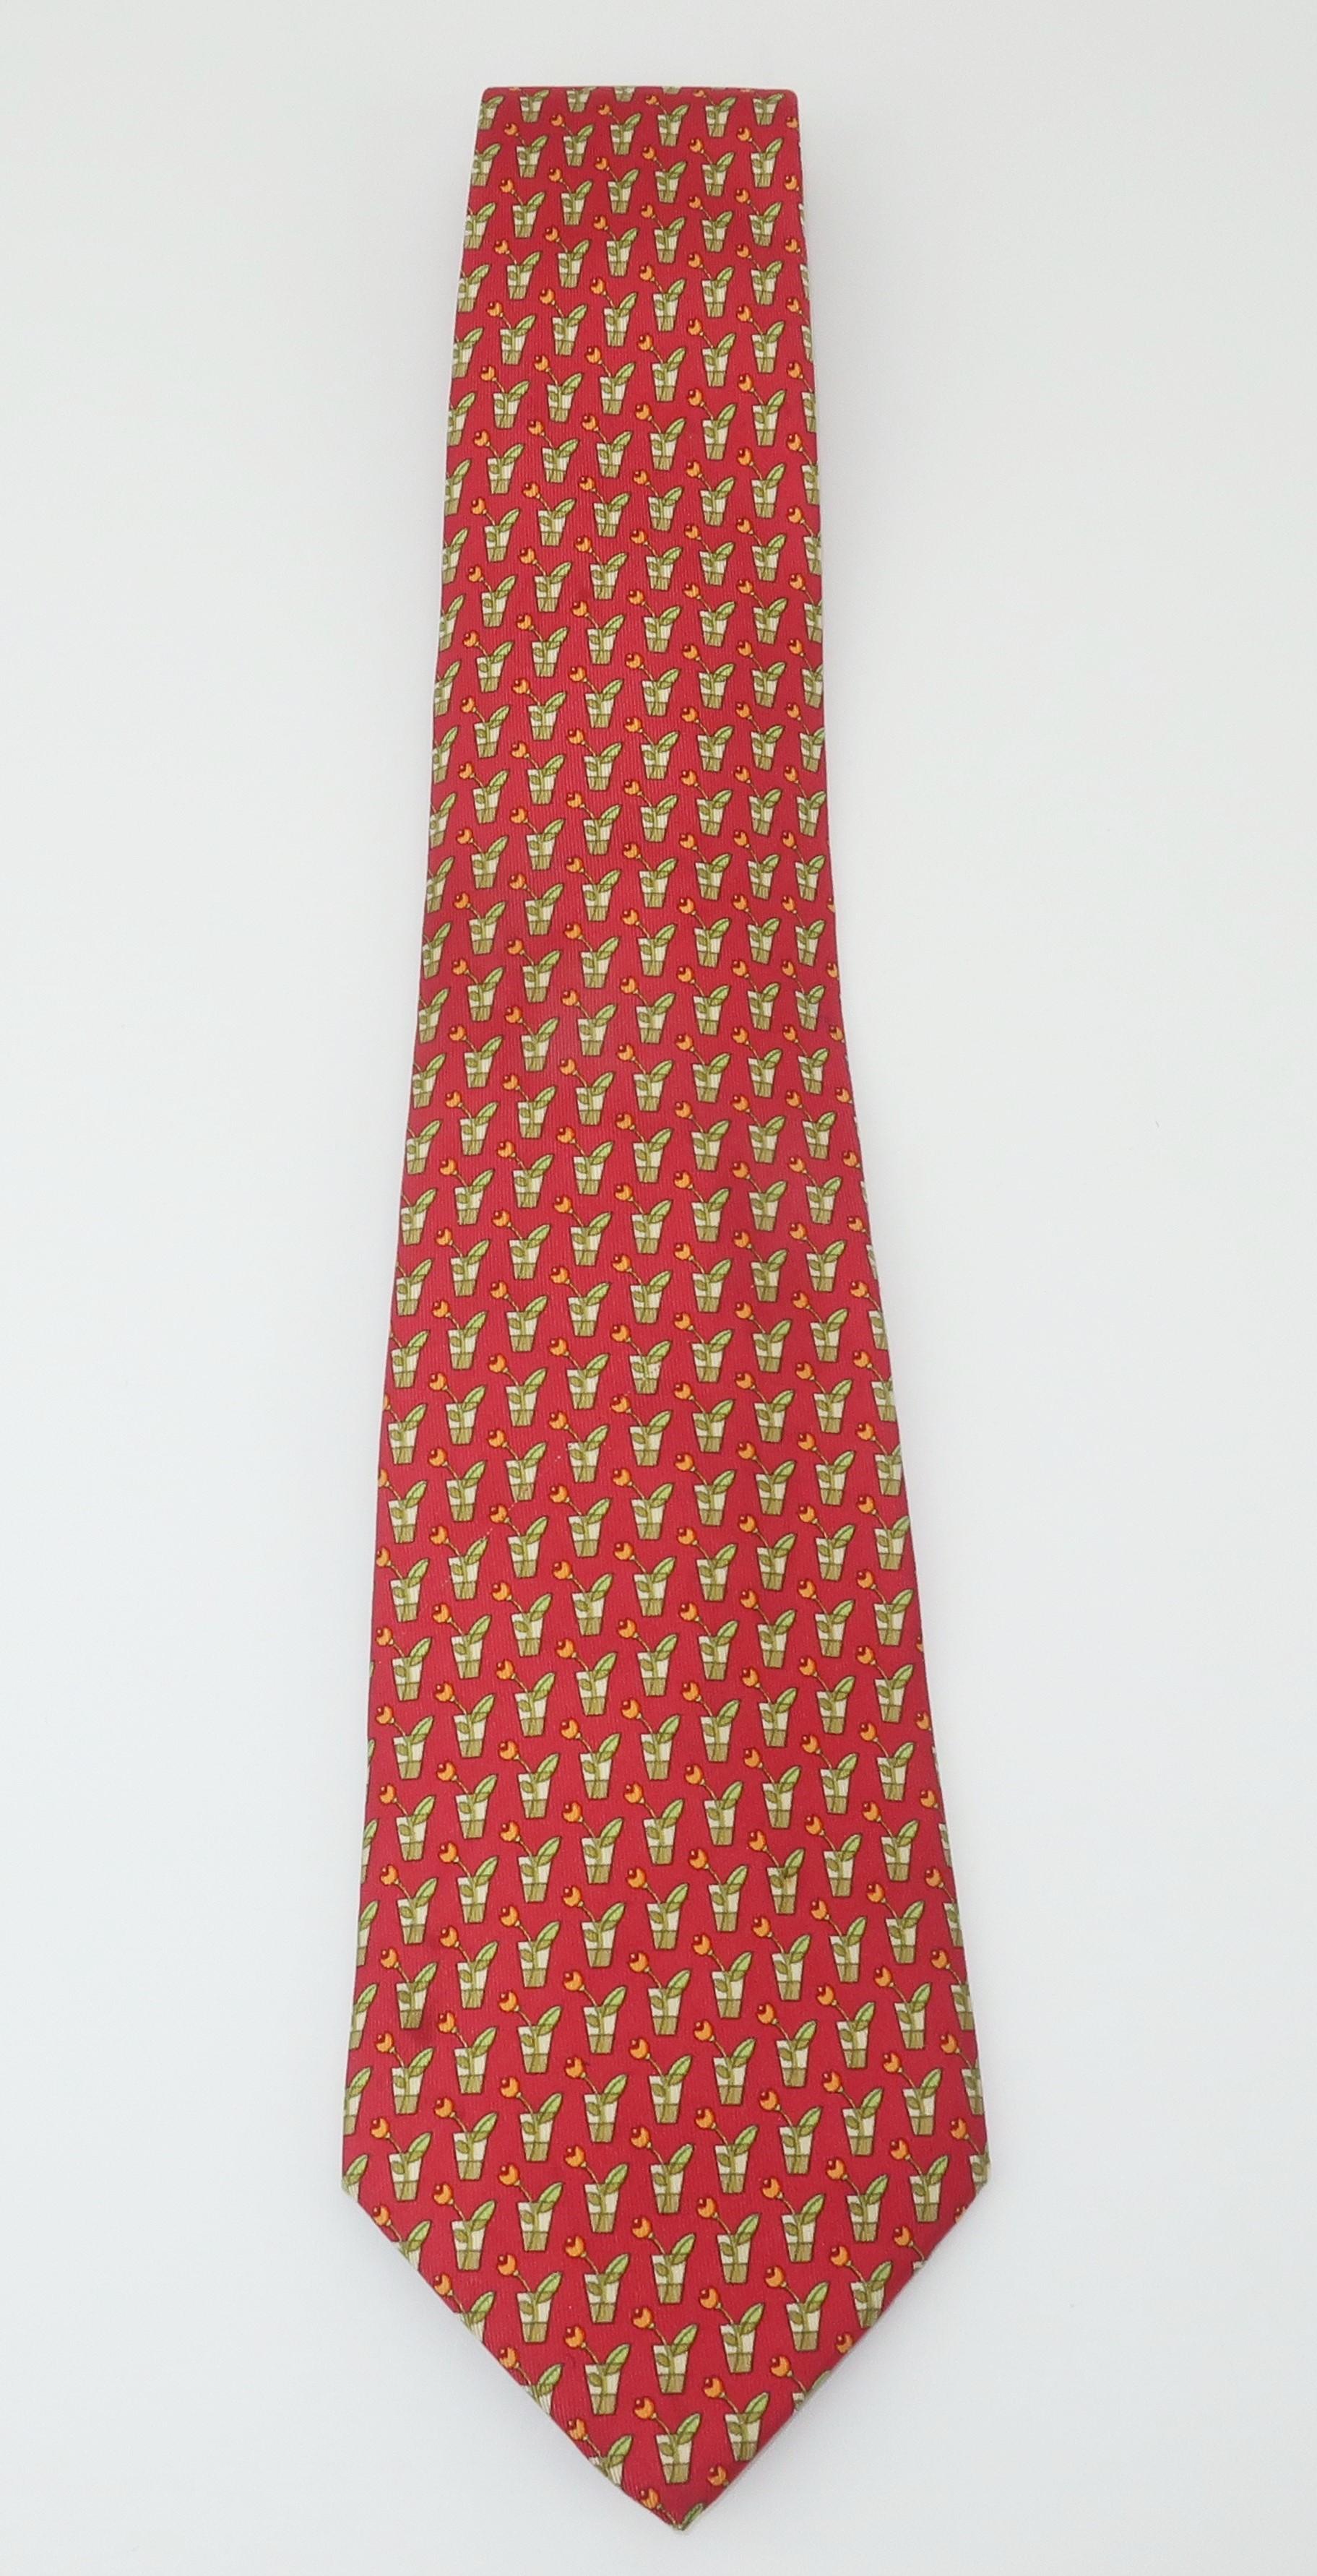 Ferragamo creates a menswear silk necktie with a cut flower motif in shades of watermelon red, sage green and light orange.  Beautifully made with the quality one would expect from Ferragamo.  Good to fair previously owned condition with a shadowy